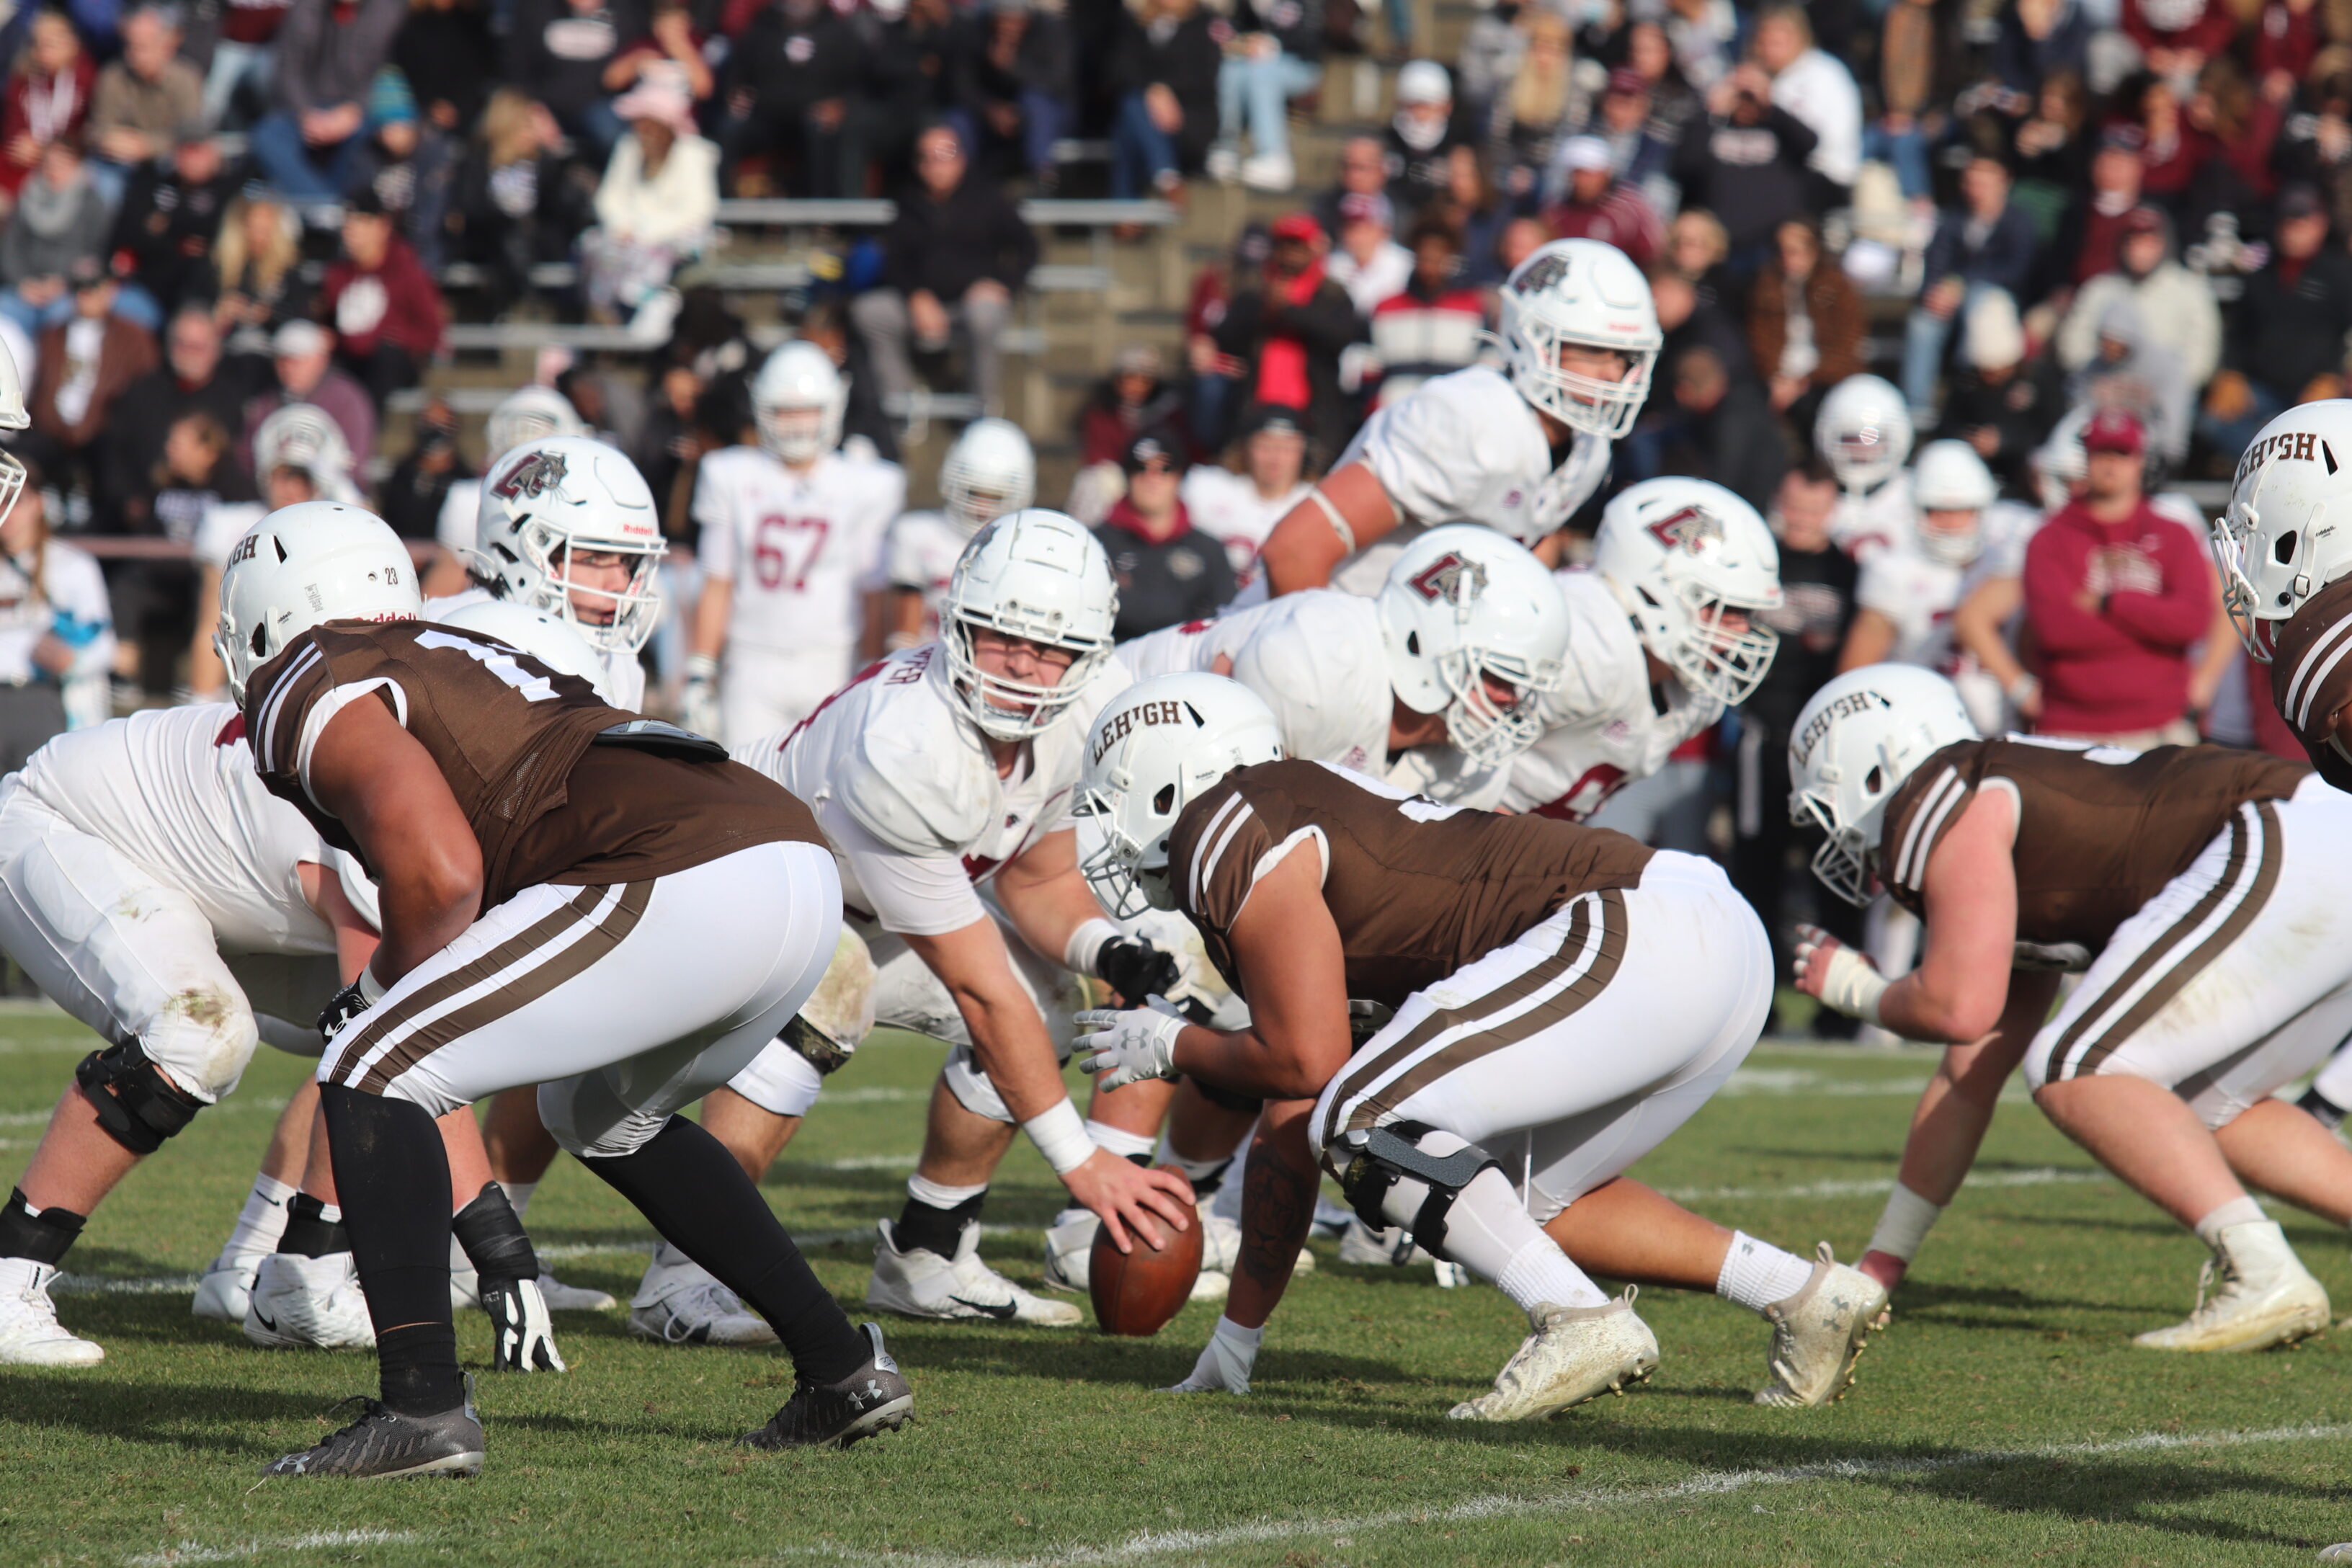 Lehigh will defeat Lafayette on rivalry Saturday The Brown and White